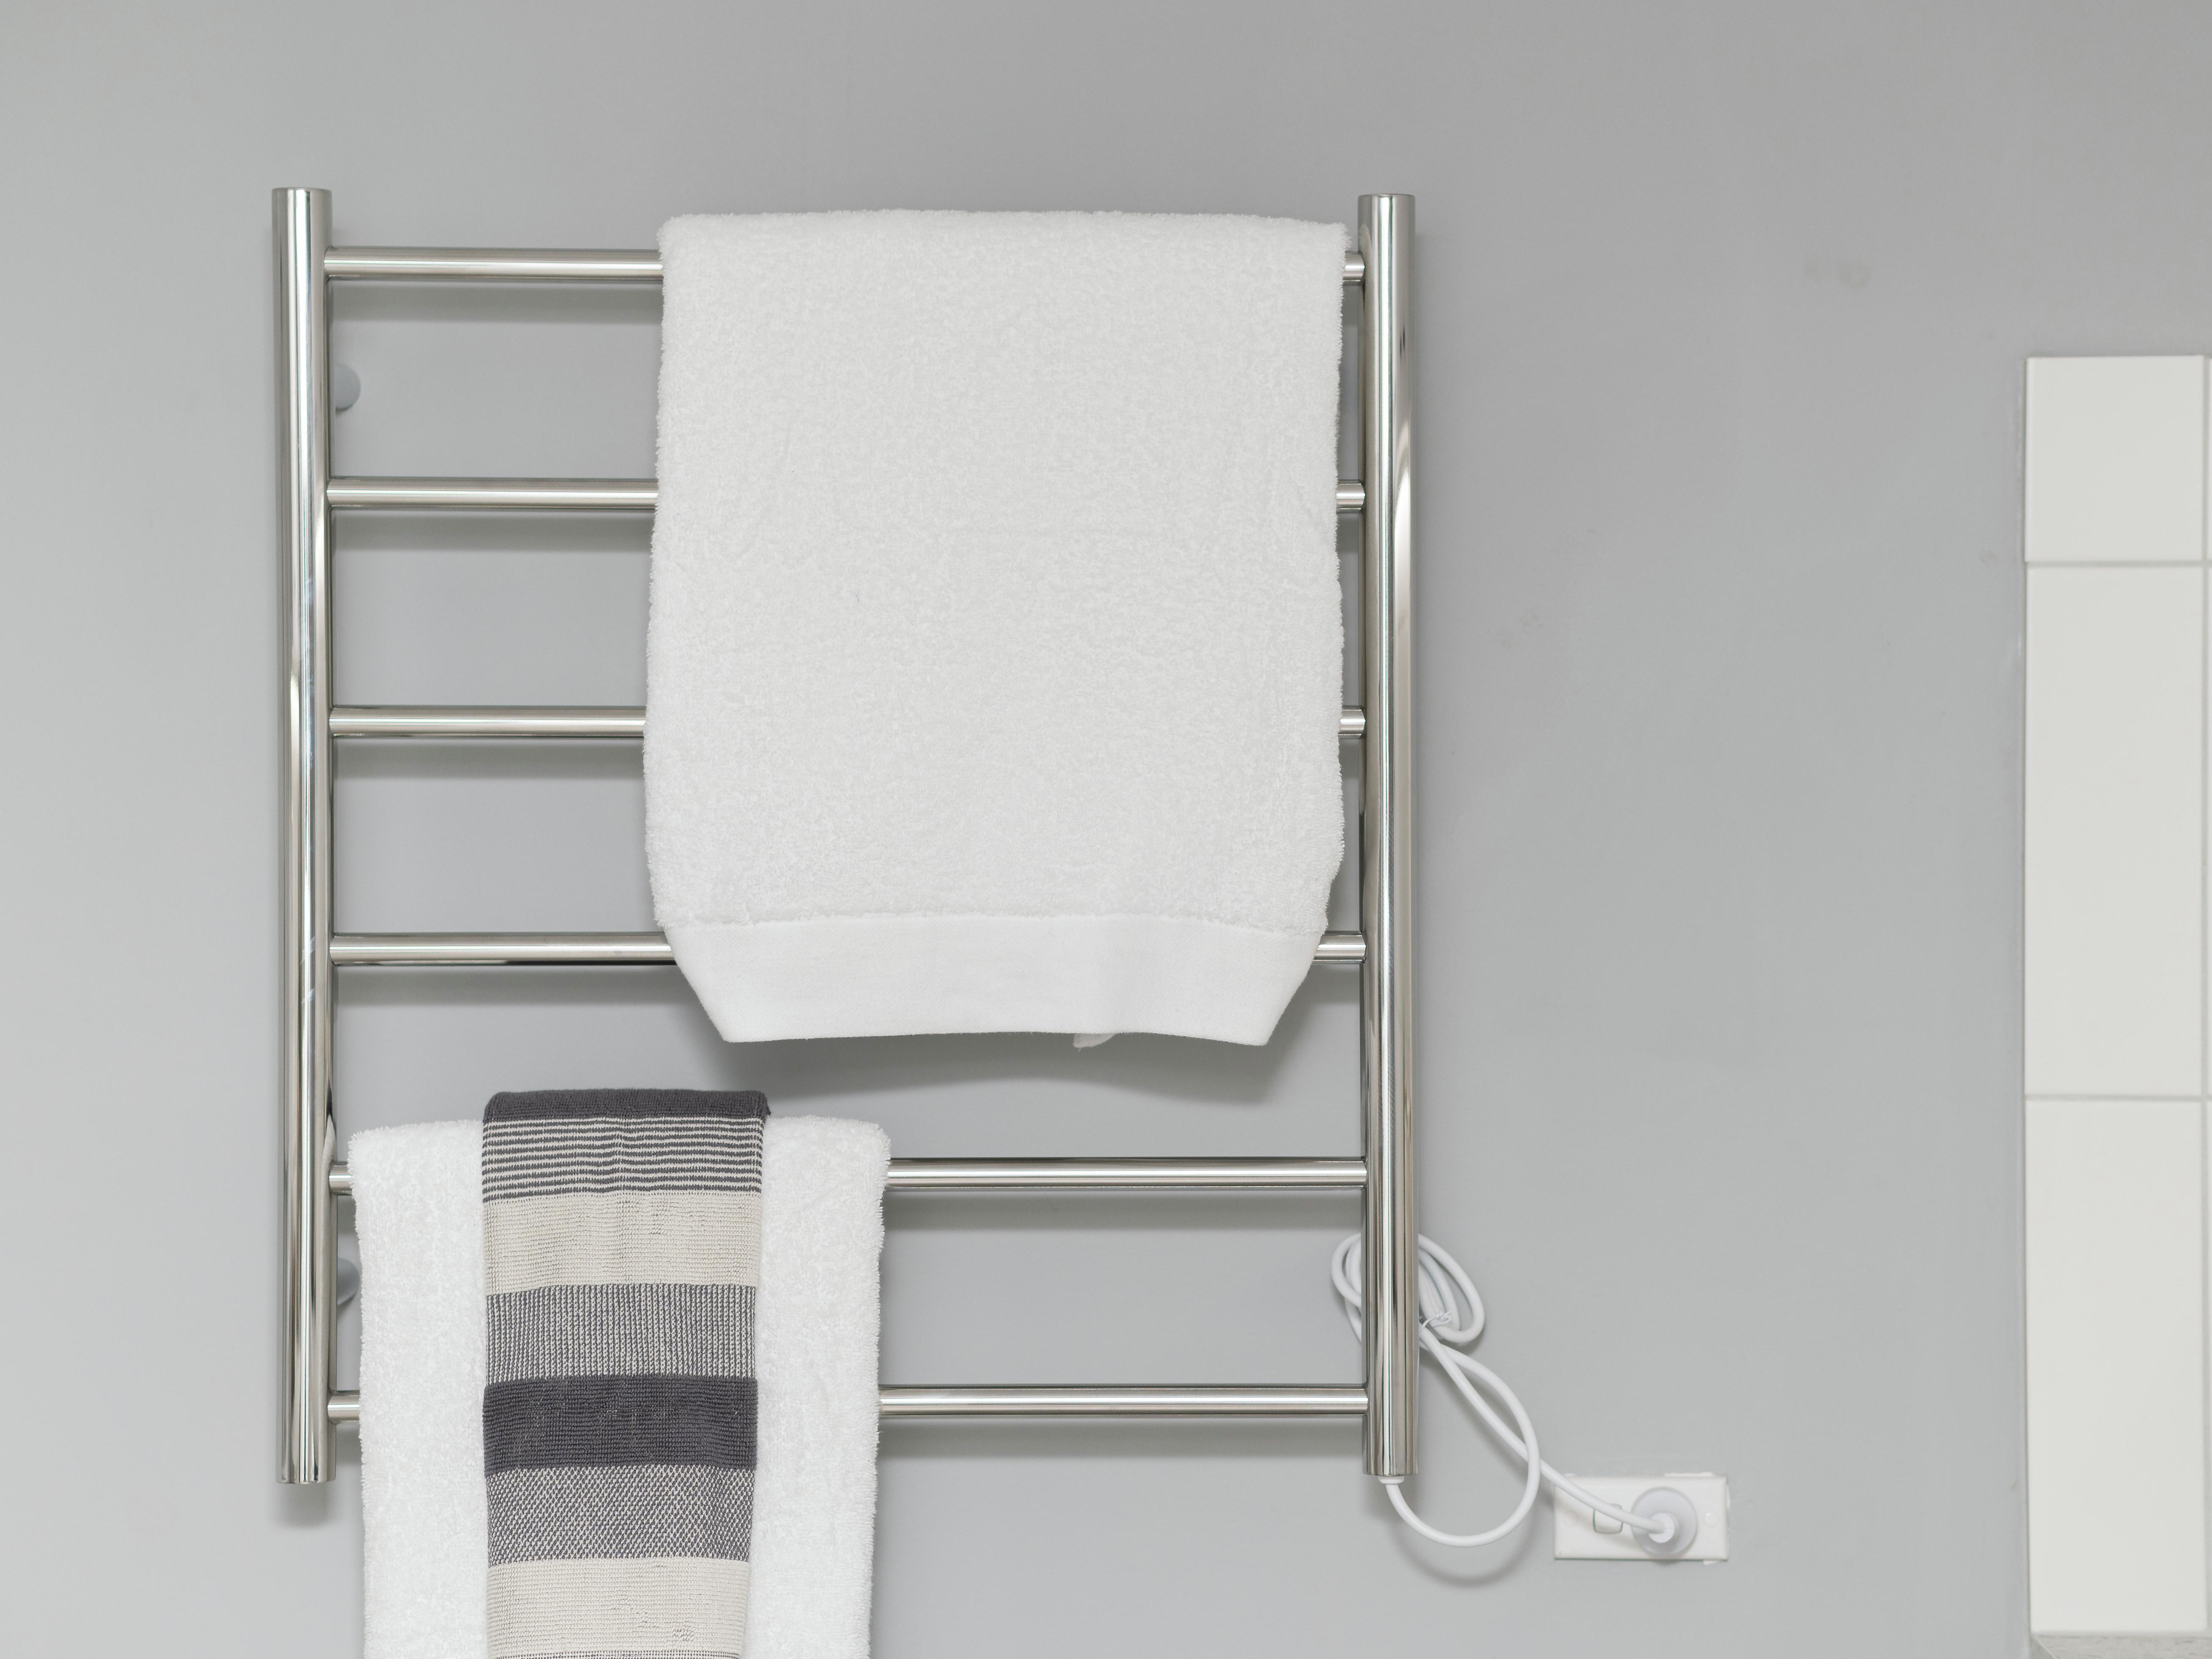 How To Install A Heated Towel Rail - Bunnings New Zealand